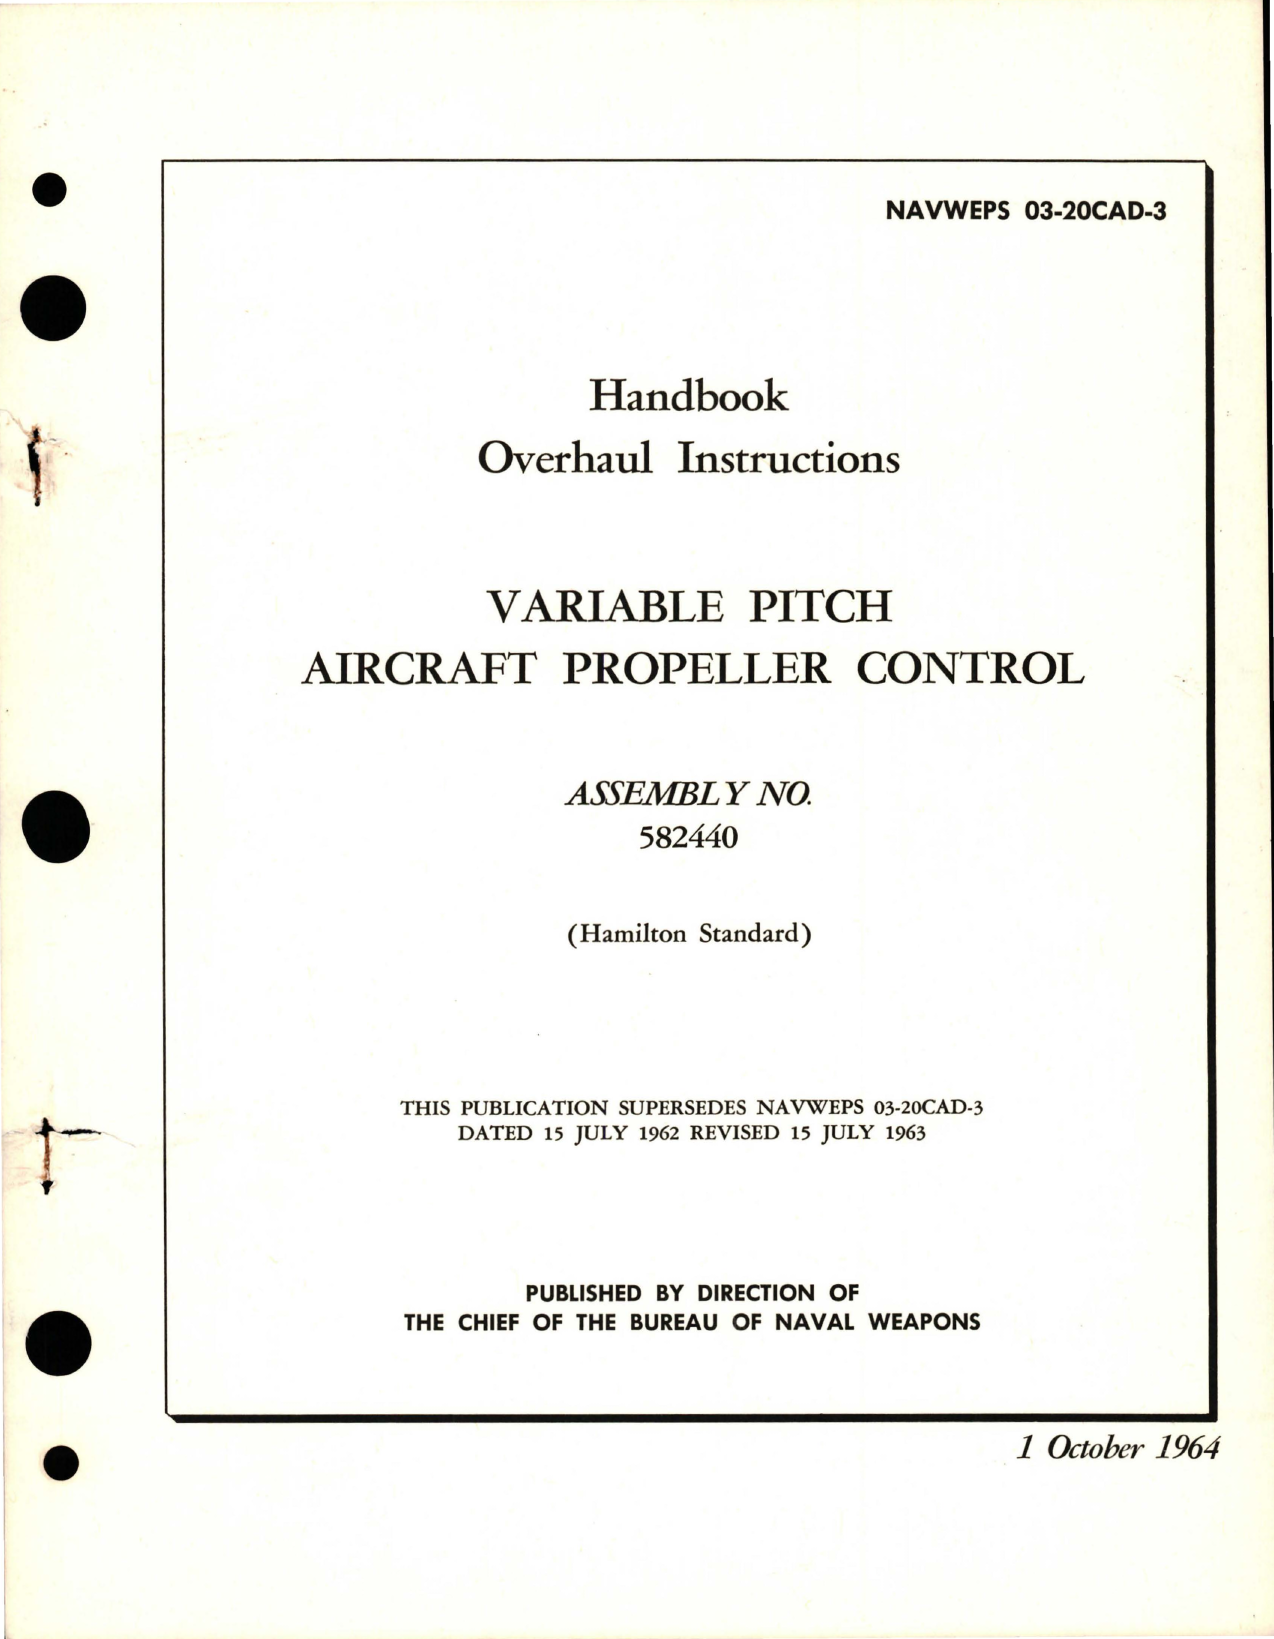 Sample page 1 from AirCorps Library document: Overhaul Instructions for Variable Pitch Aircraft Propeller Control - Assembly No. 582440 